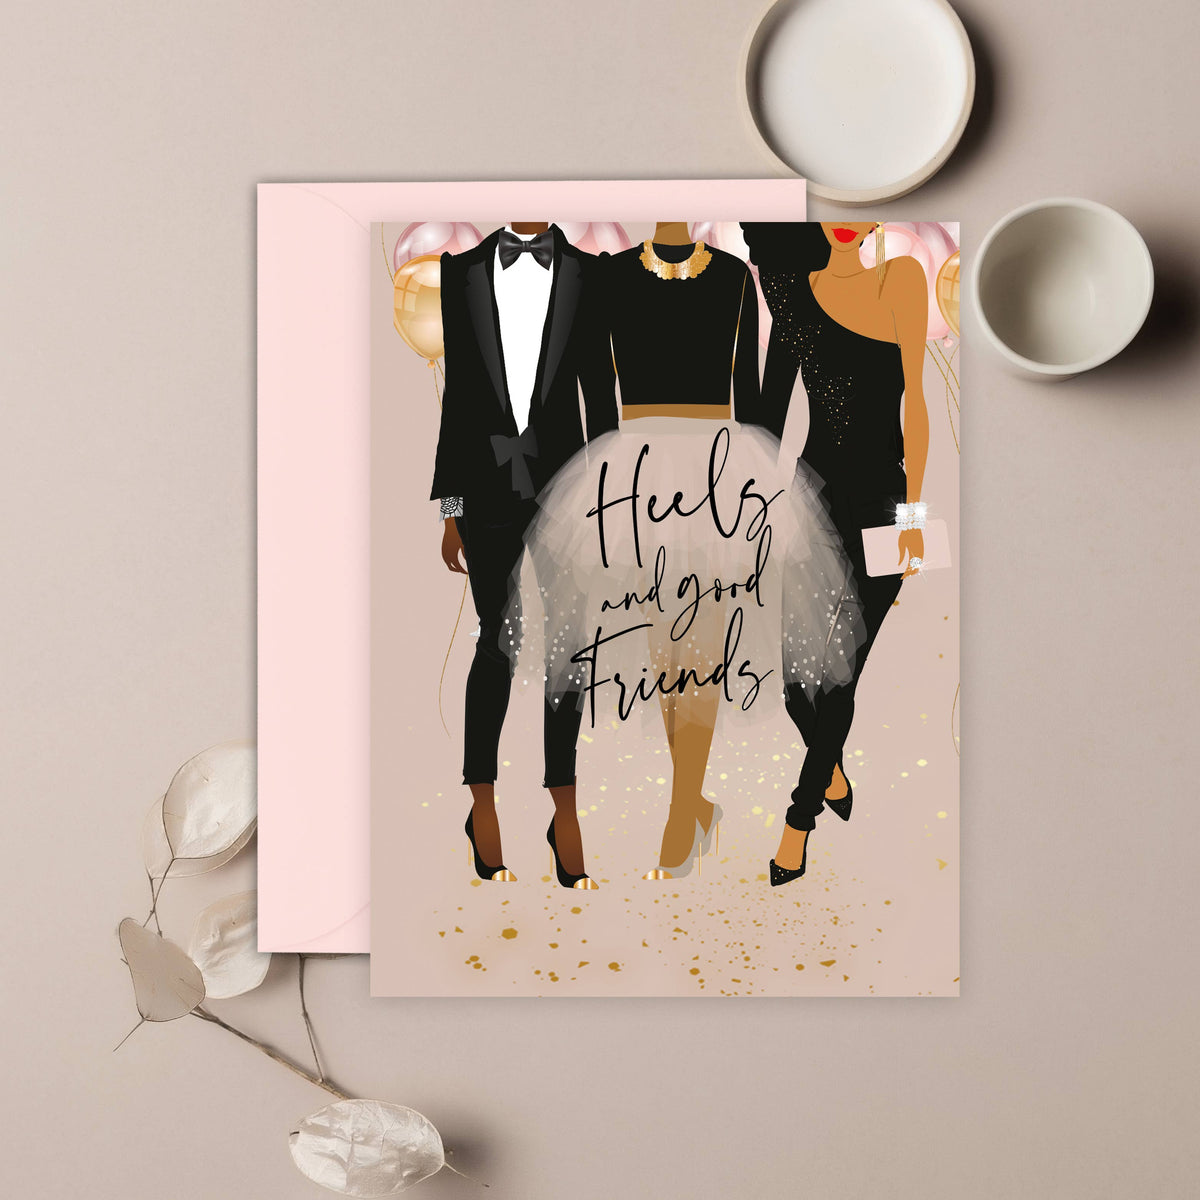 Heels and Friends Greeting Card